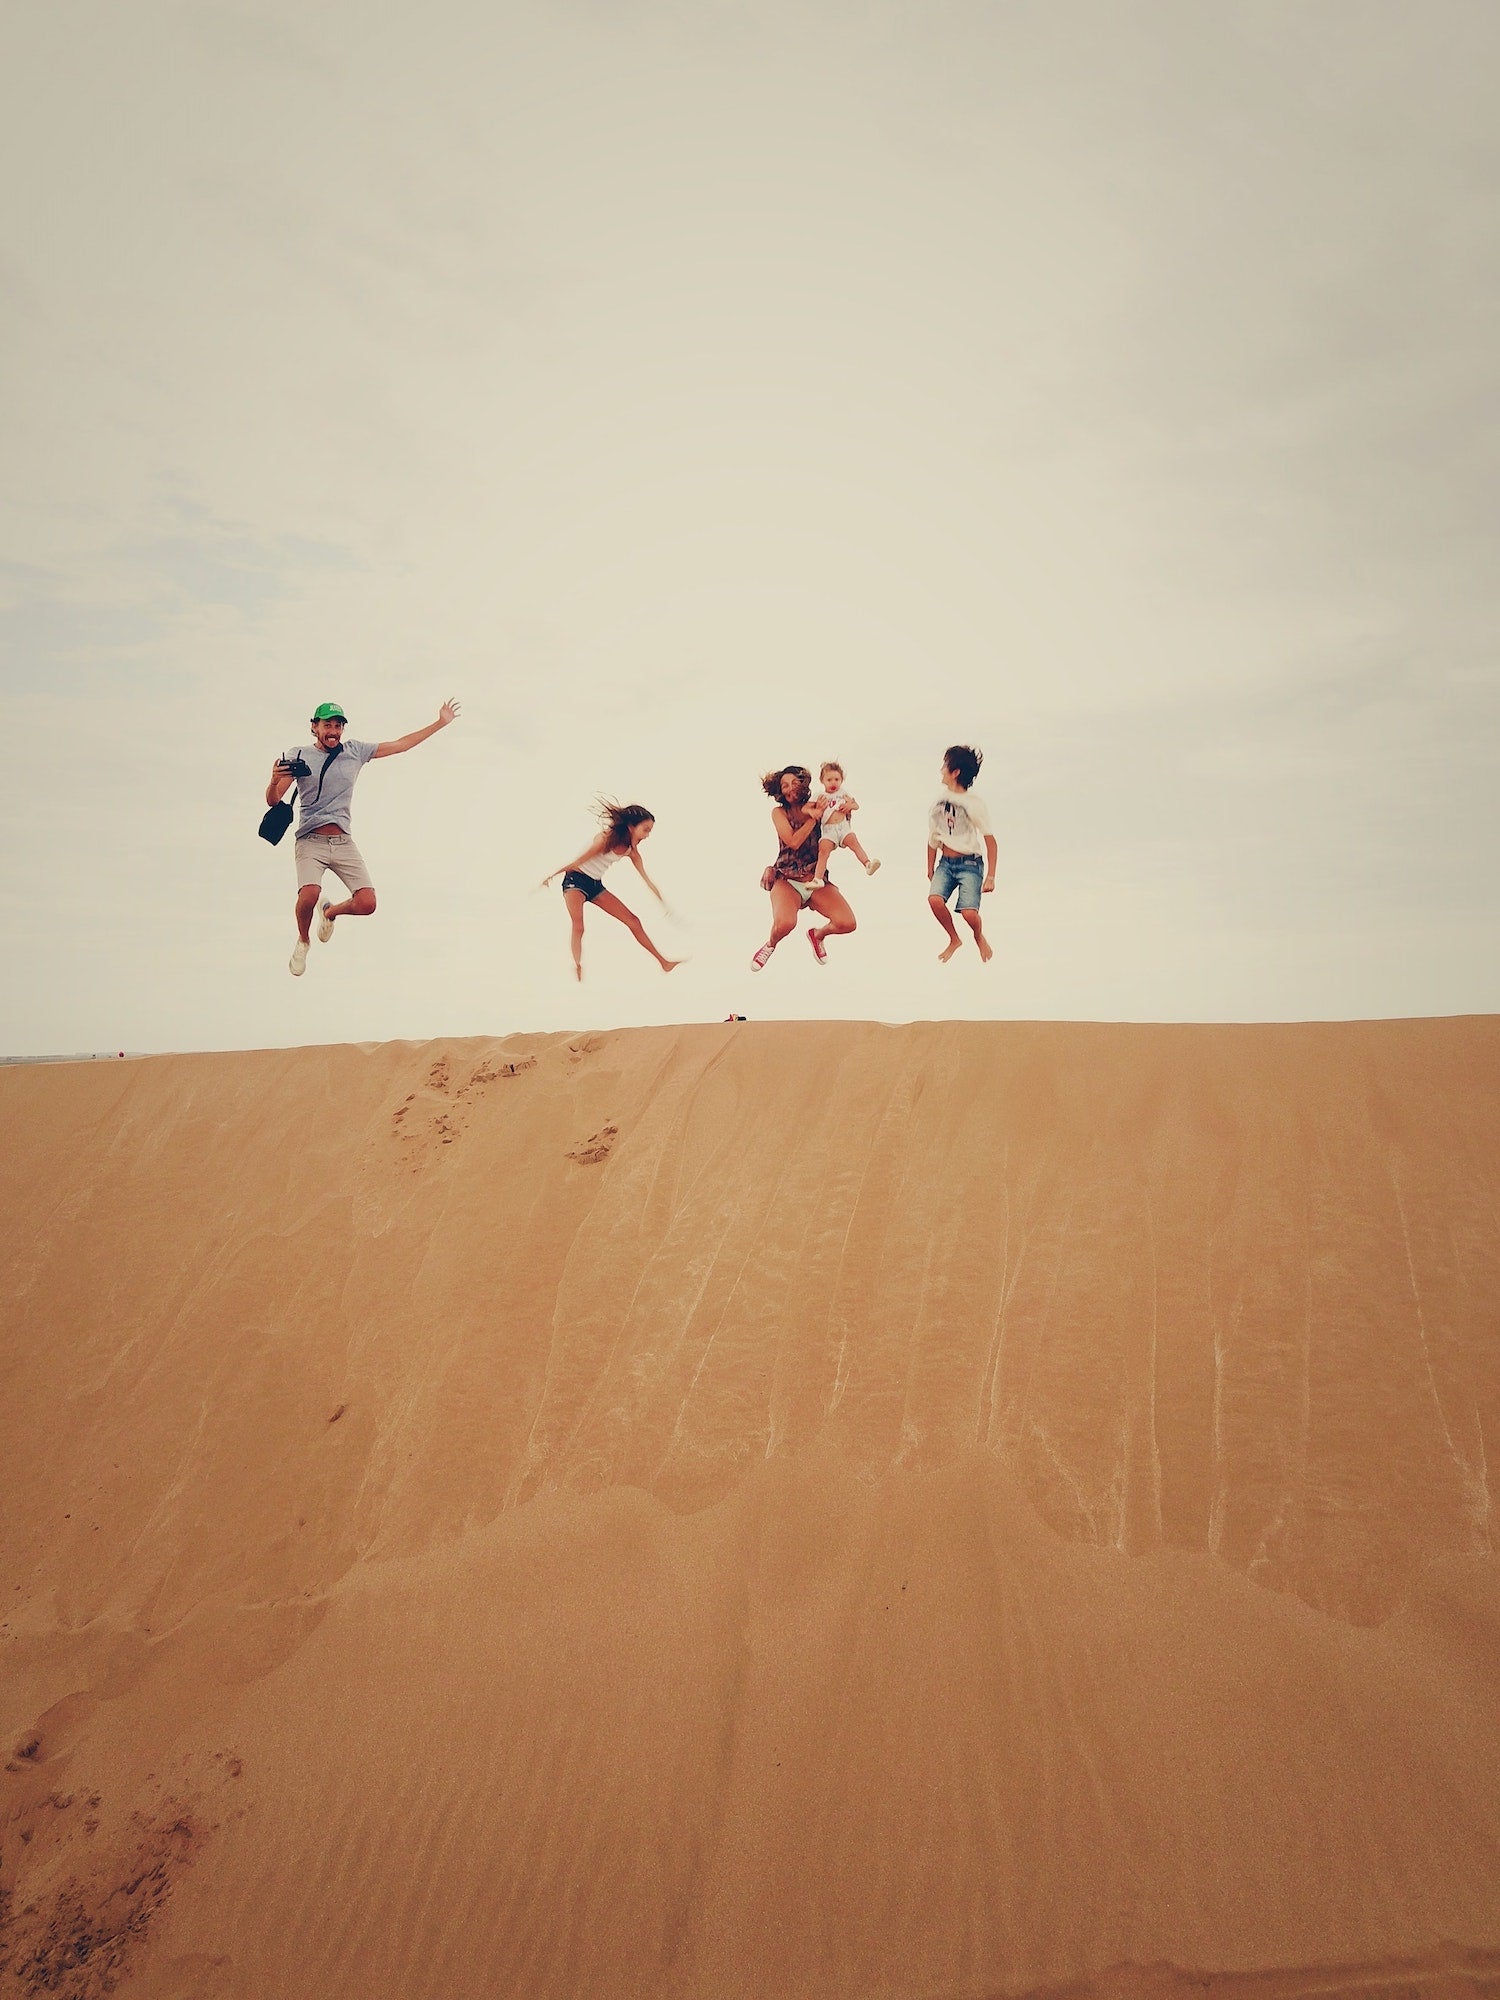 Plan a Family Adventure That Your Kids Won't Stop Talking About. Family posing for a jump shot at the sand dunes